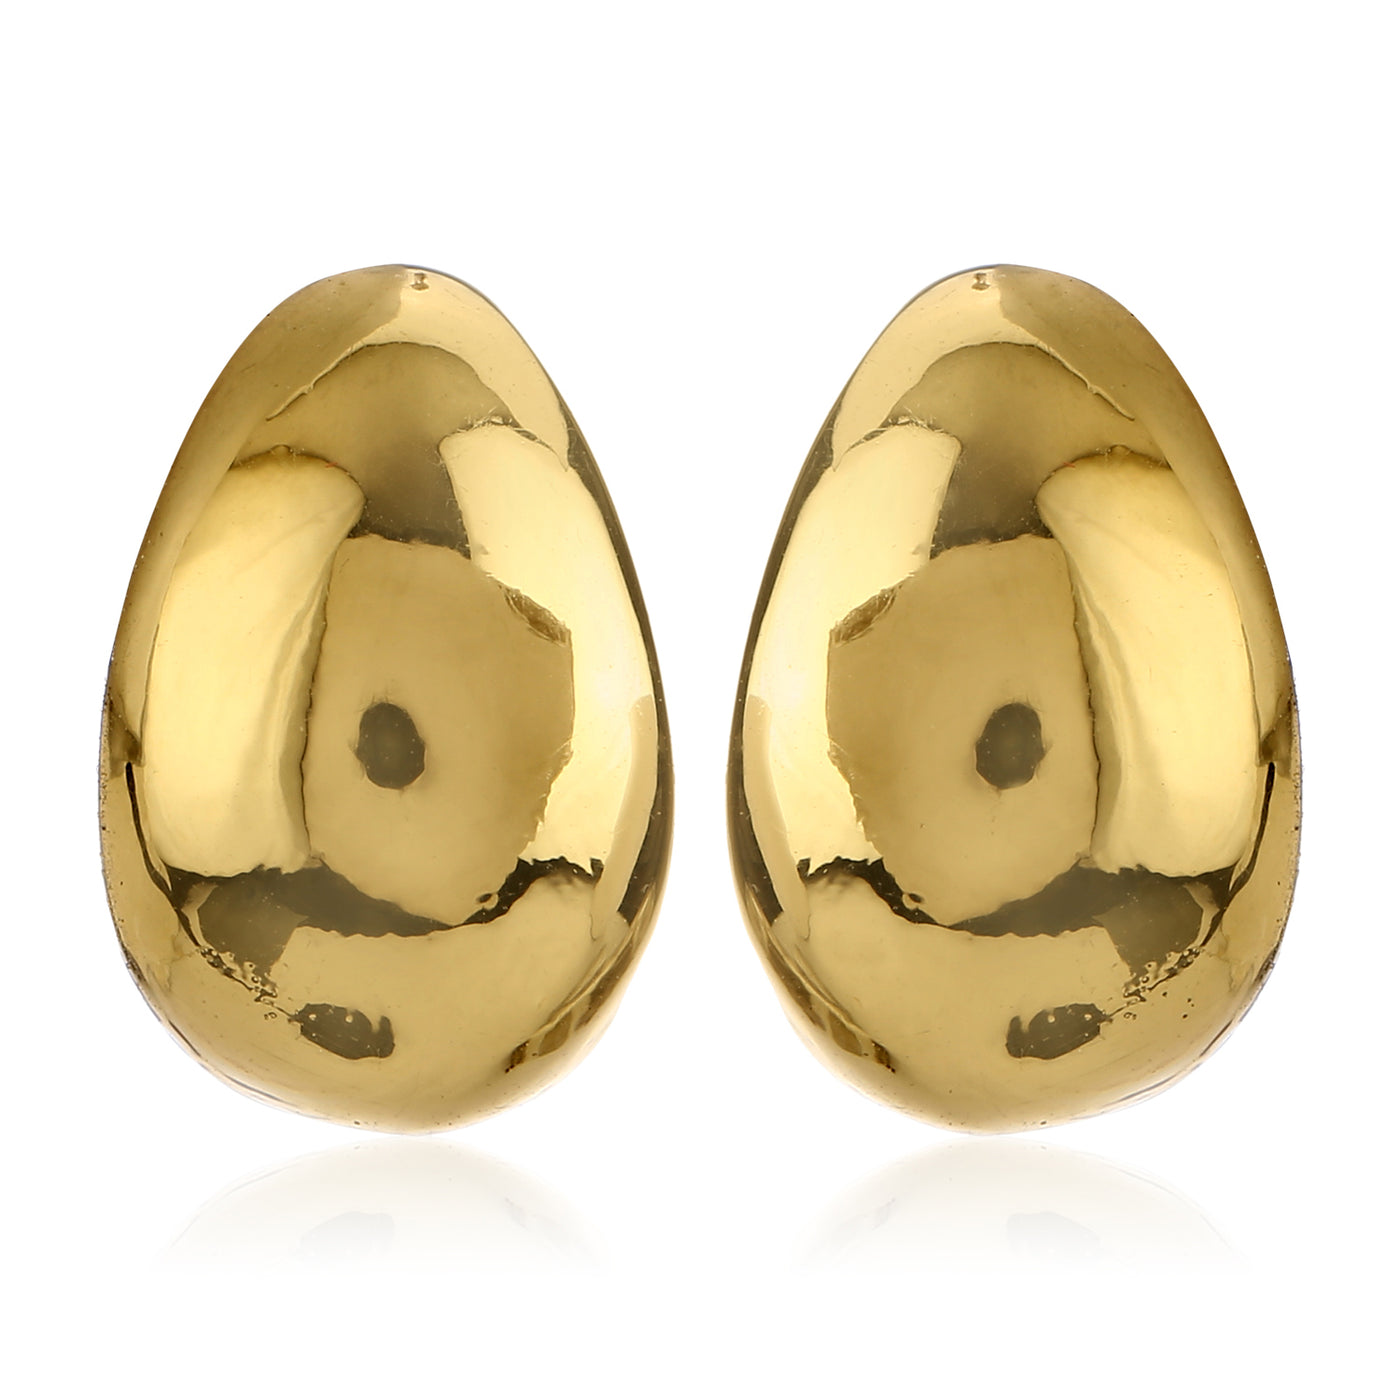 Gold Plated Round Stud Womens Earrings